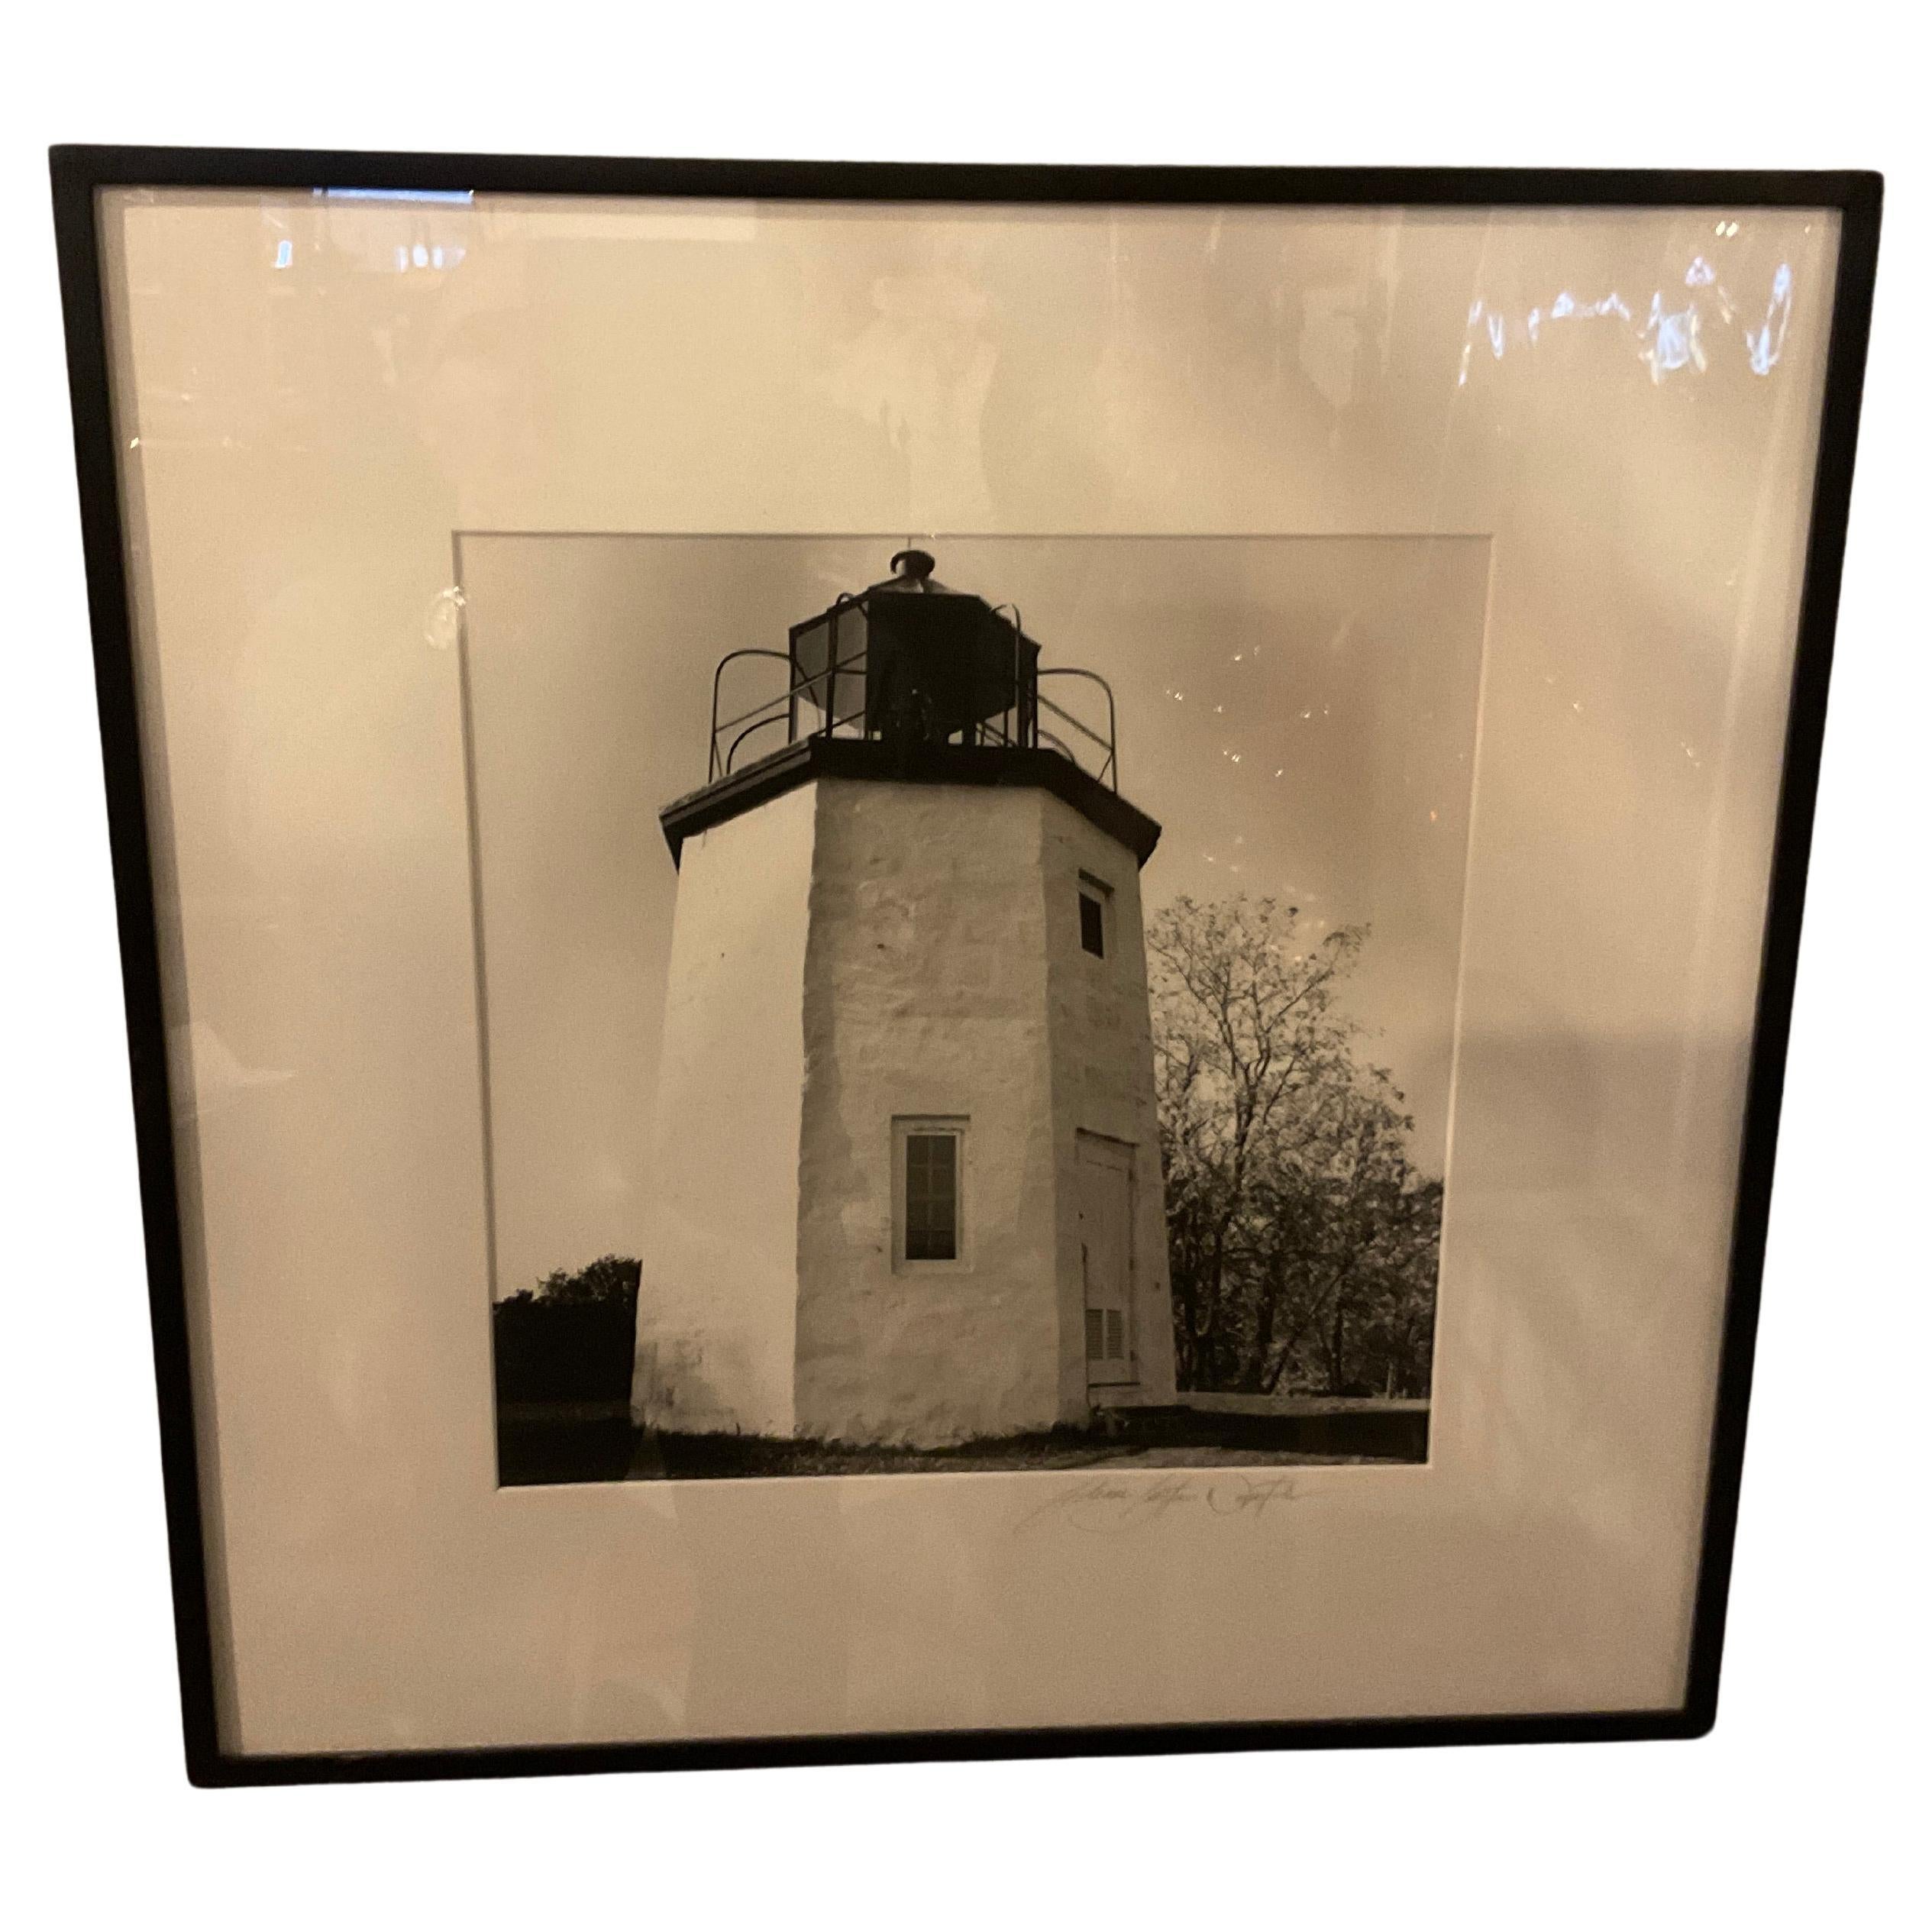 Black And White Photo Of A Lighthouse By Ileane Bernstein Naprstek  For Sale